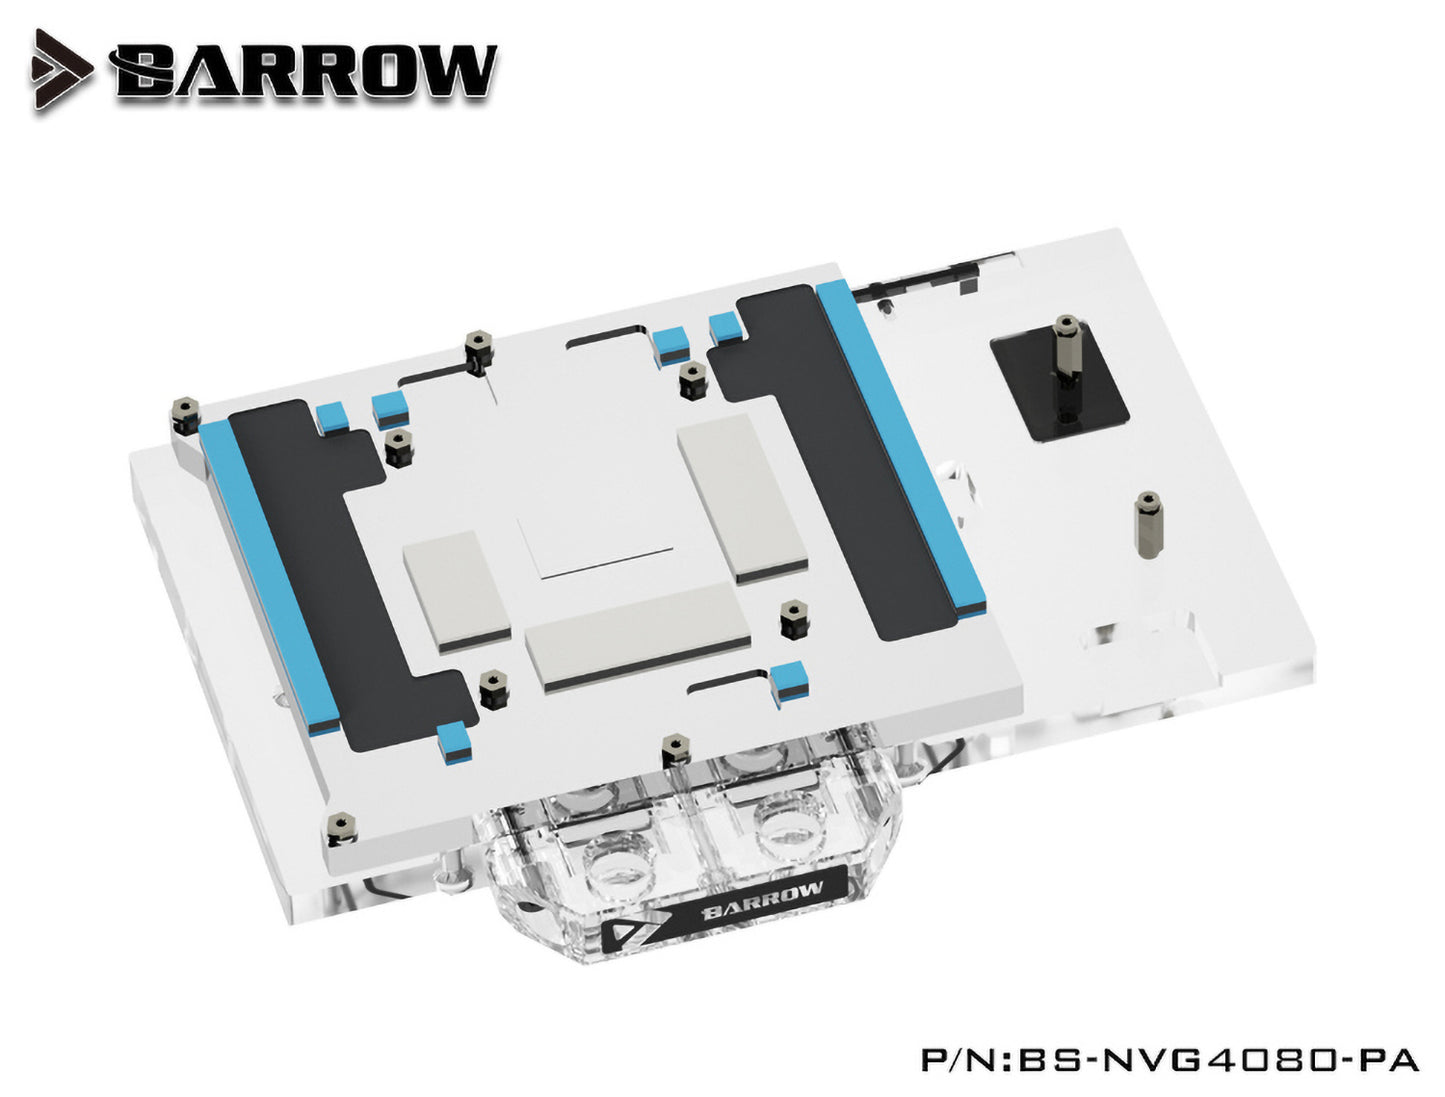 Barrow GPU Water Block For Nvidia RTX 4080 / 4080 Super Founders Edition, Full Cover With Backplate PC Water Cooling Cooler, BS-NVG4080-PA